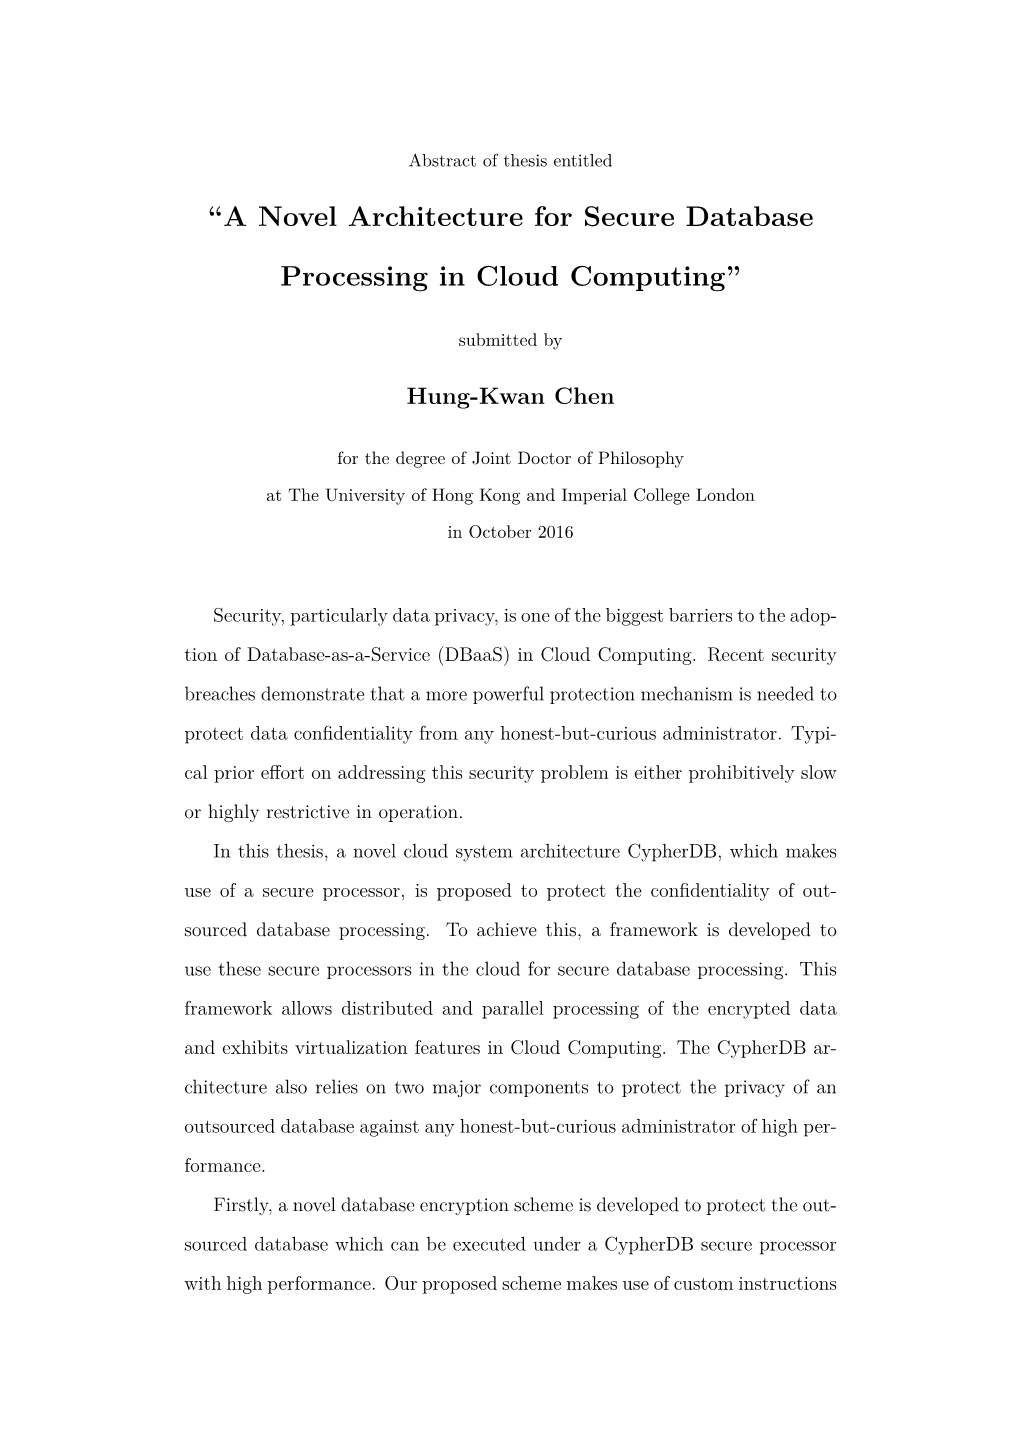 “A Novel Architecture for Secure Database Processing in Cloud